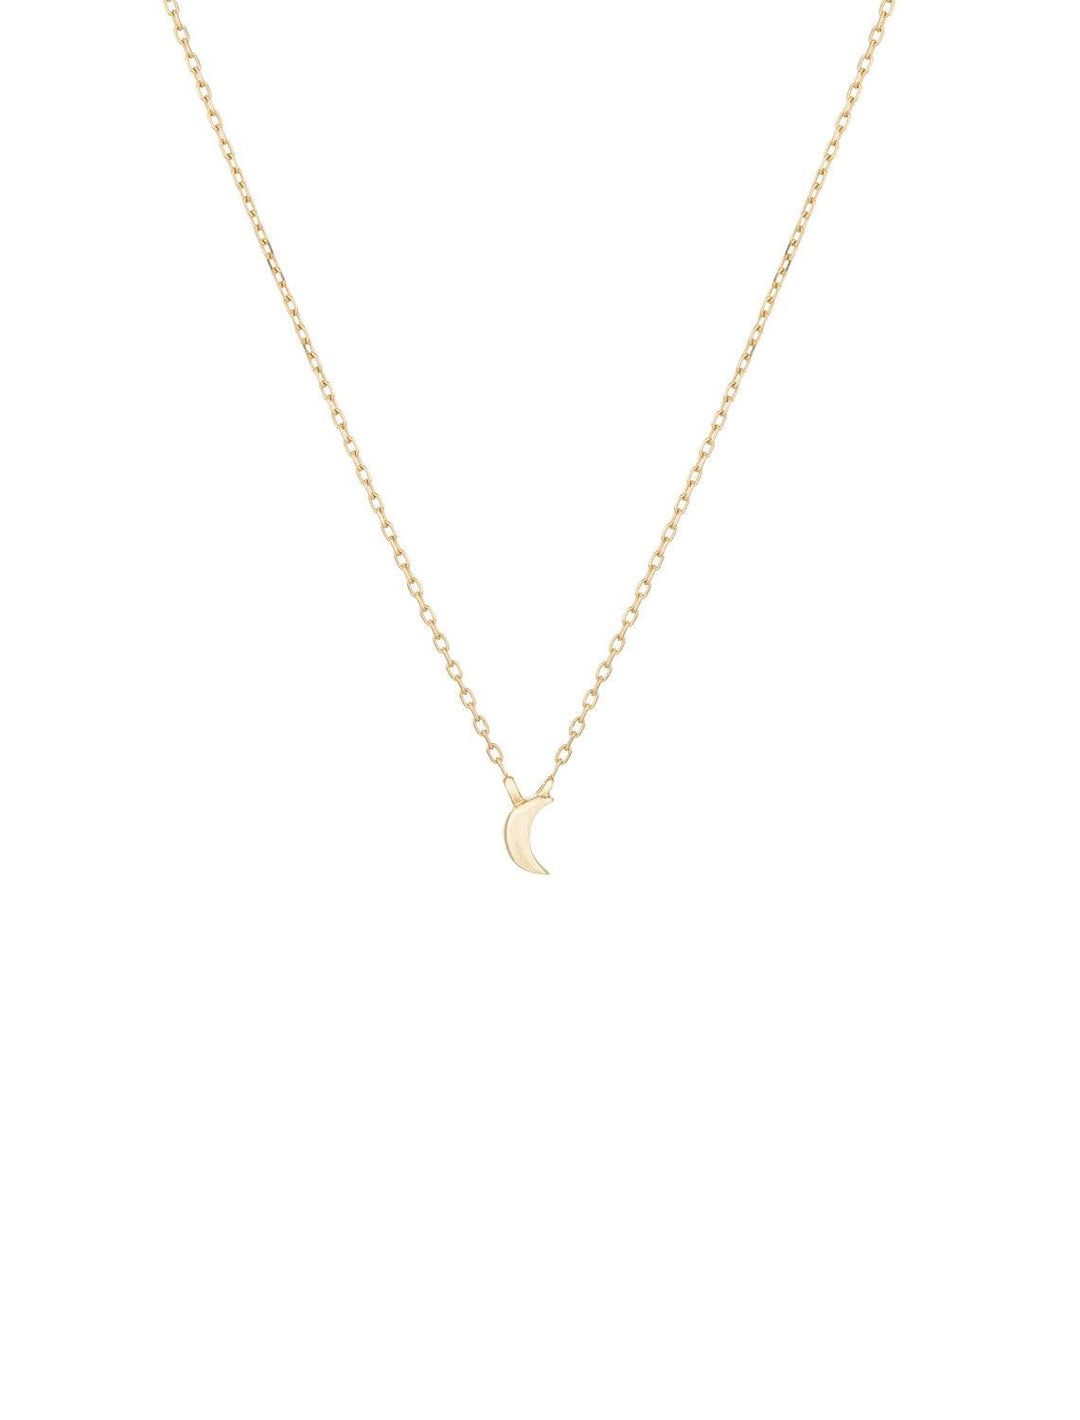 super tiny puffy moon necklace in gold (2)